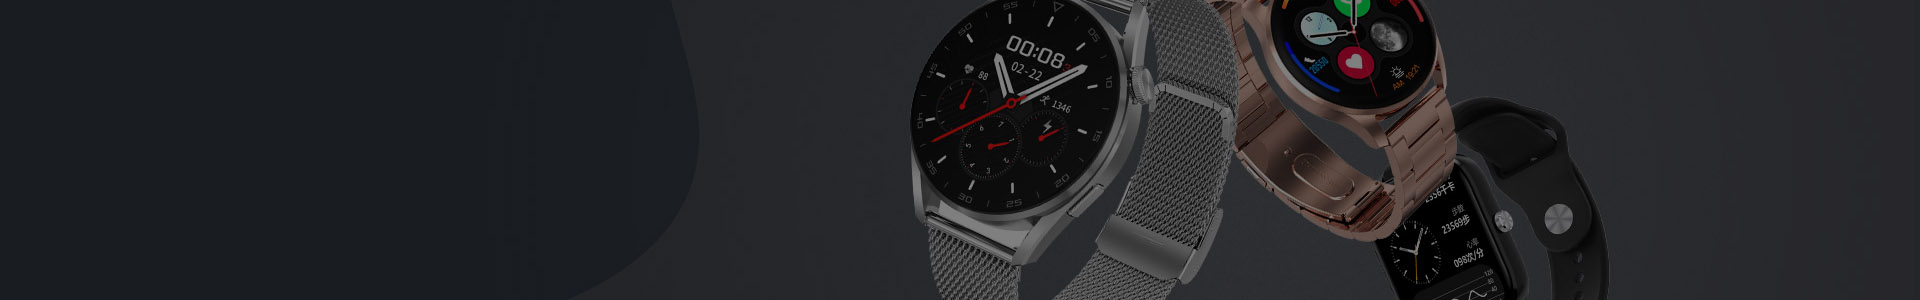 Buy Original DTNO.1 Smartwatches Online, recommended by DTNO.1 Smartwatch Offici